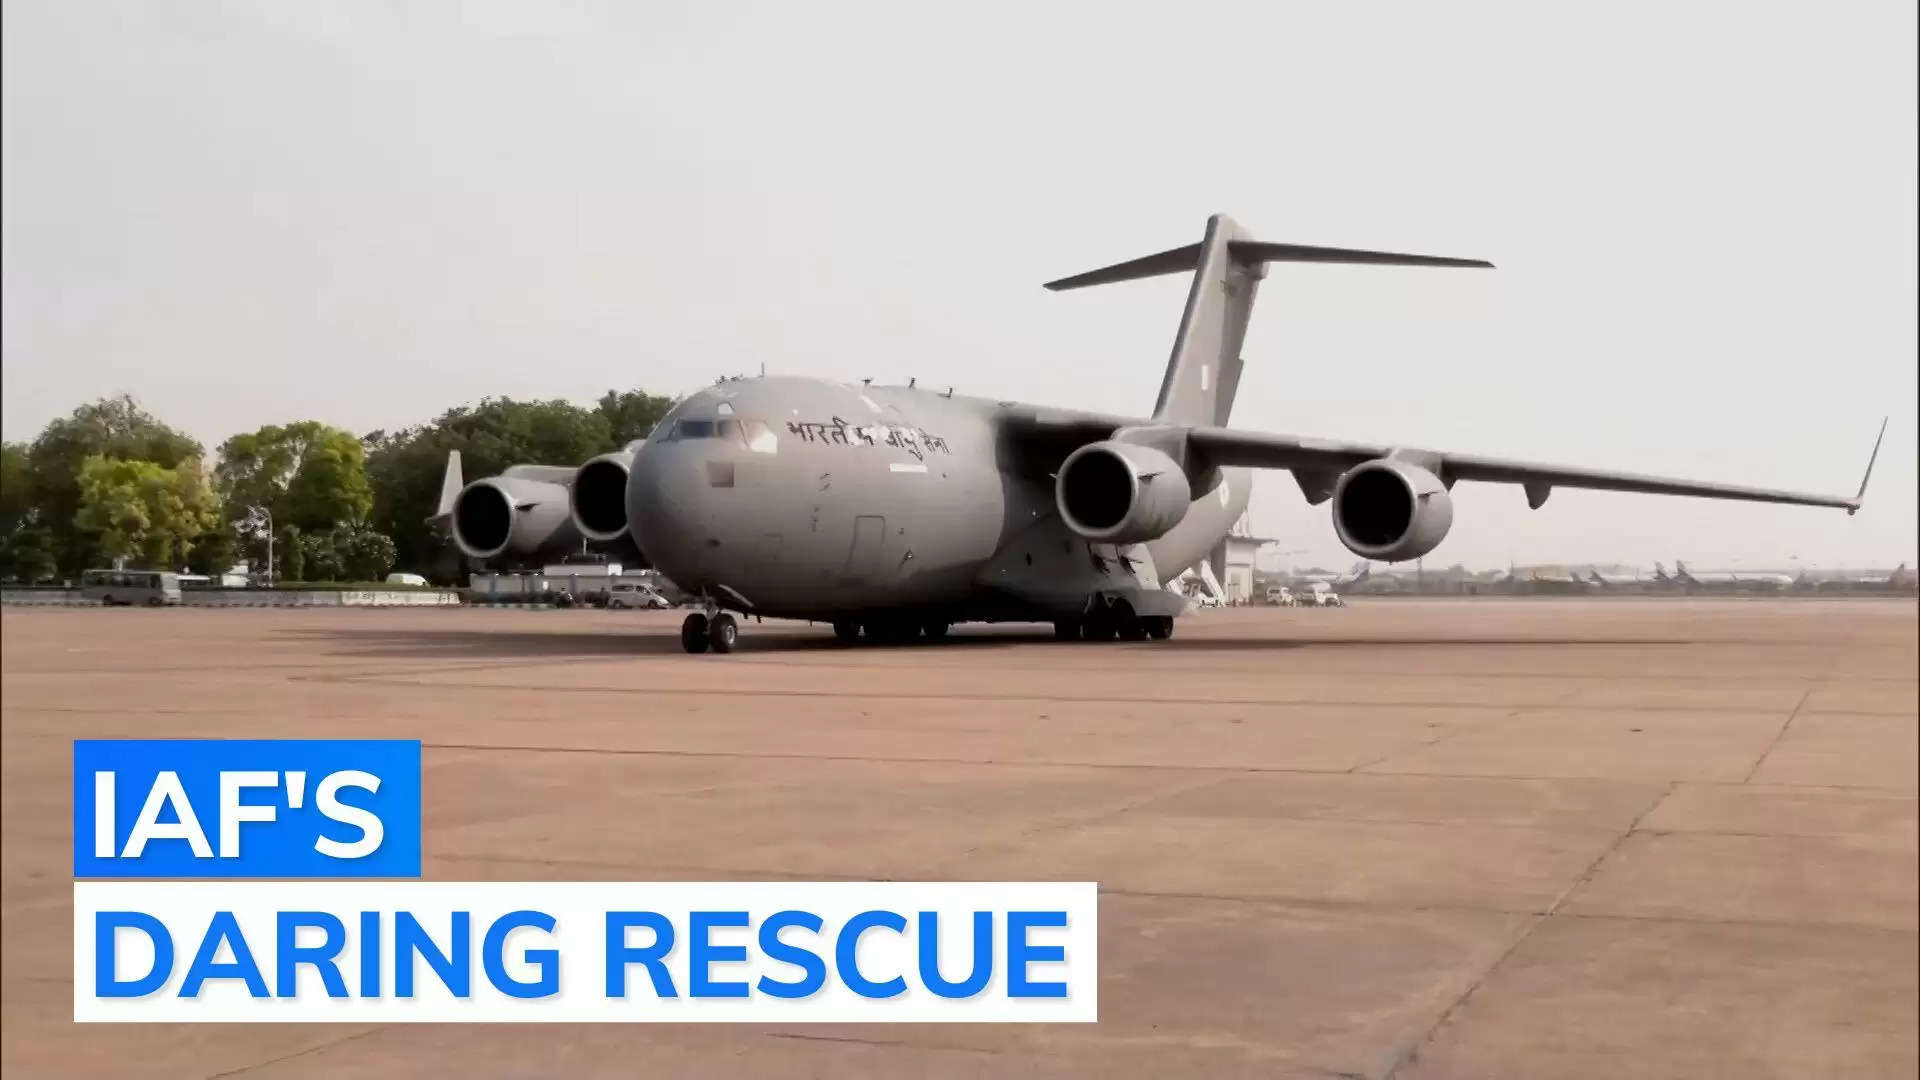 IAF pilots rescue 121 people from a devastated airfield in Sudan using night vision goggles.